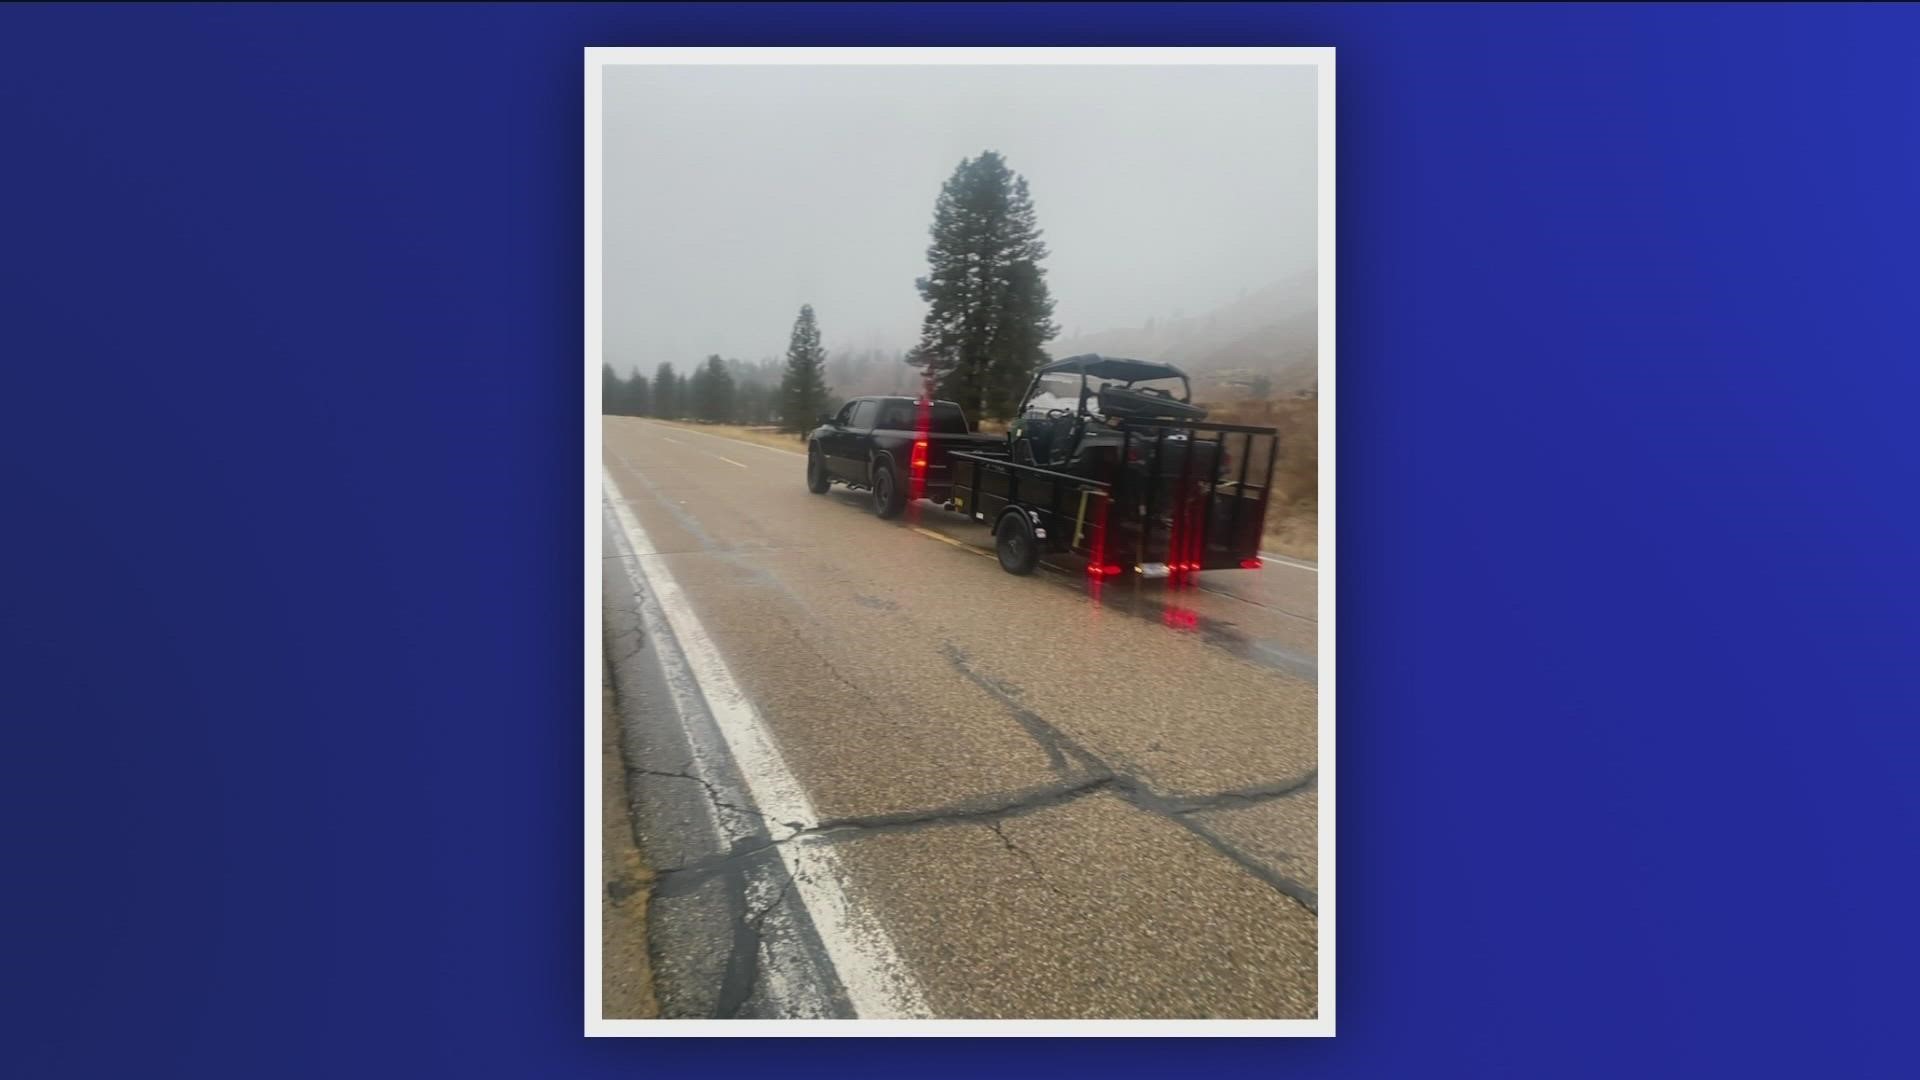 Officers believe the driver of the truck may have information about a potential violation that occurred on Highway 17, on Monday, Nov. 7.